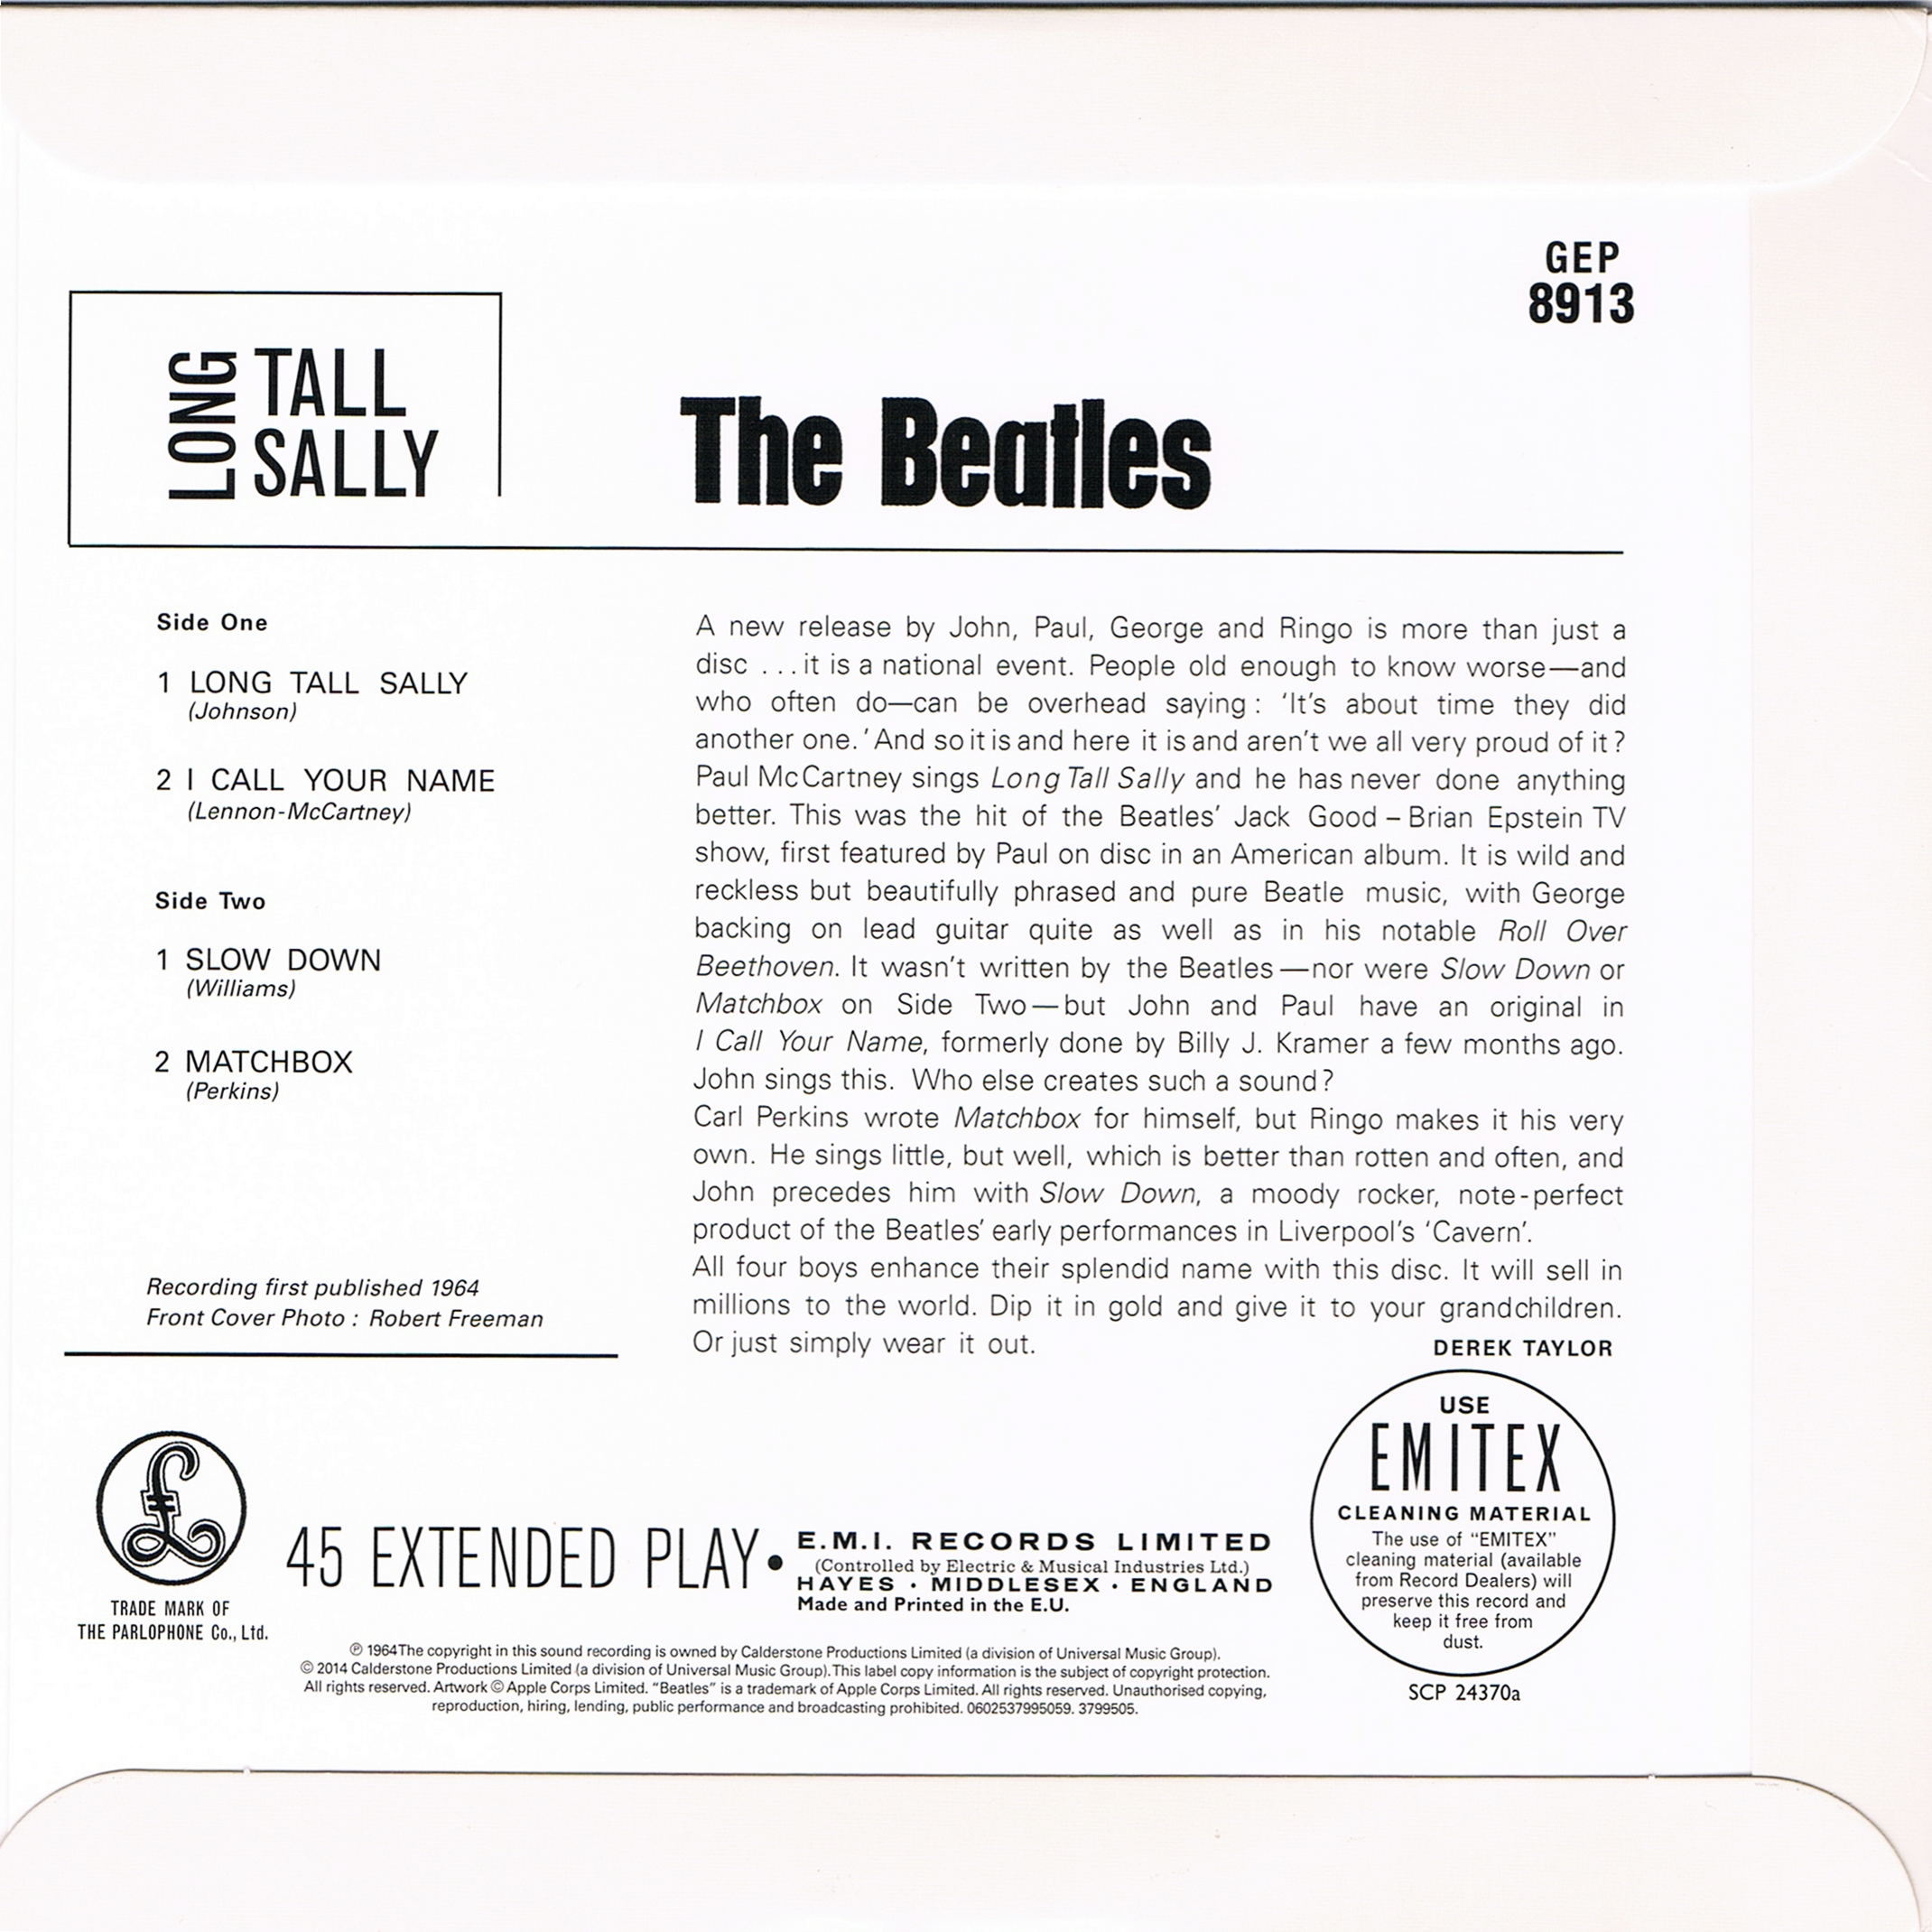 The Beatles Collection » Long Tall Sally, Parlophone GEP 8913.